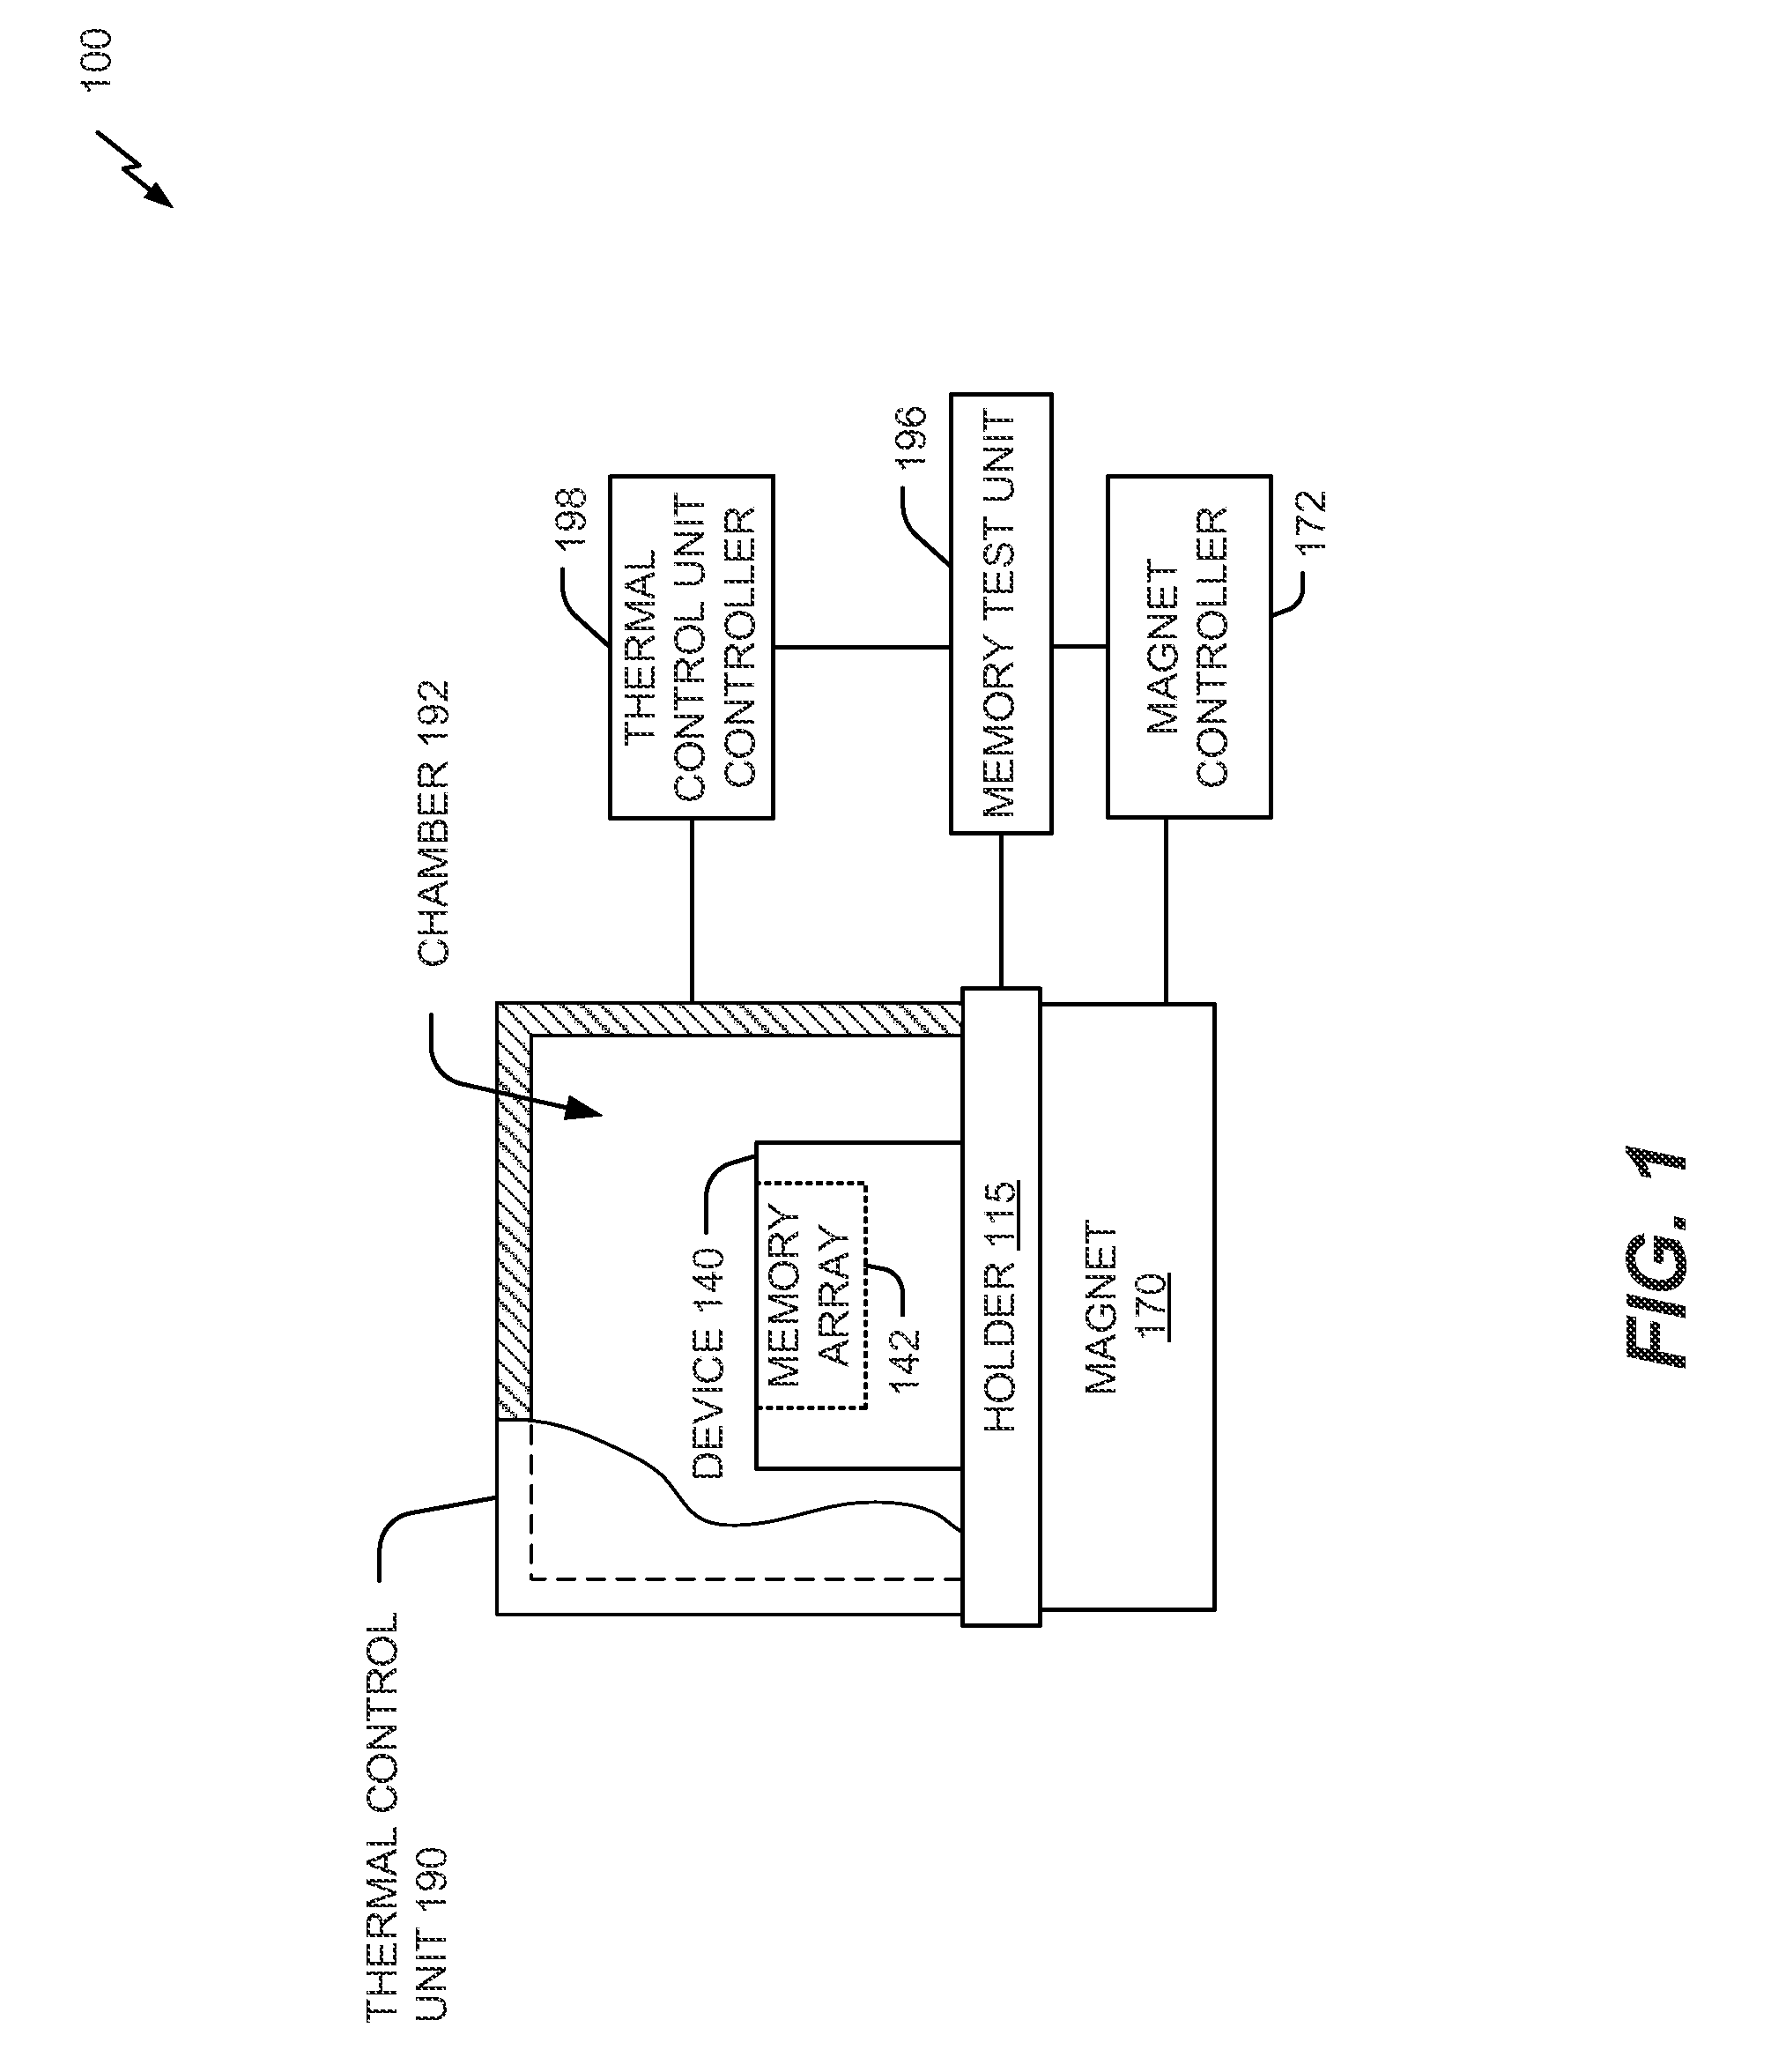 Magnetic automatic test equipment (ATE) memory tester device and method employing temperature control